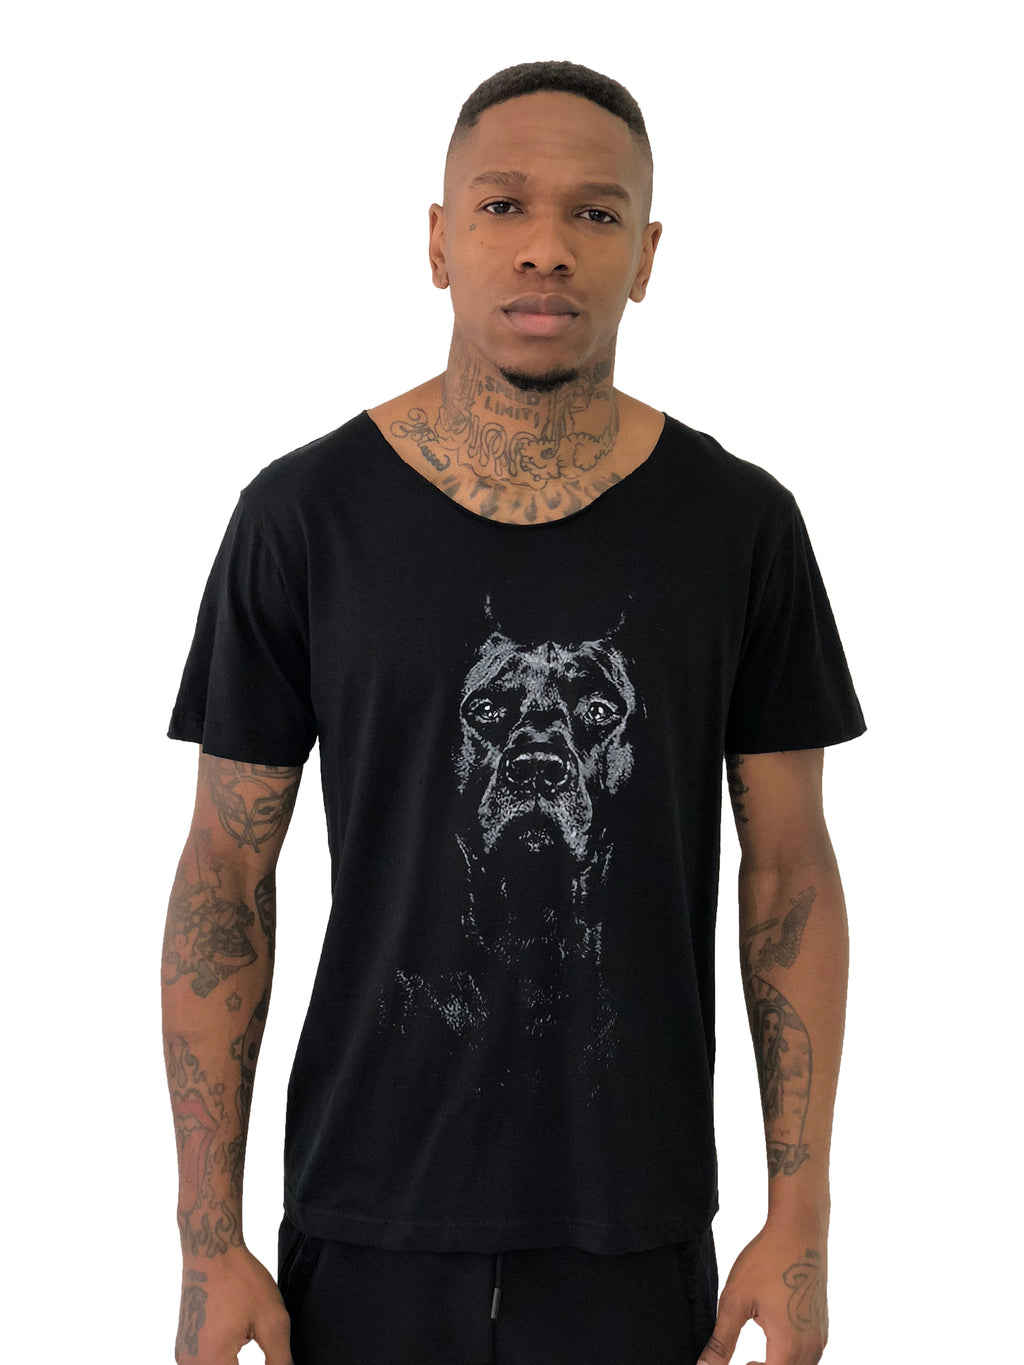 T-Shirt "Great Dane" The Elegance Of Fashion Pet Black by iacobuccyounes Italy - Brit Boss 